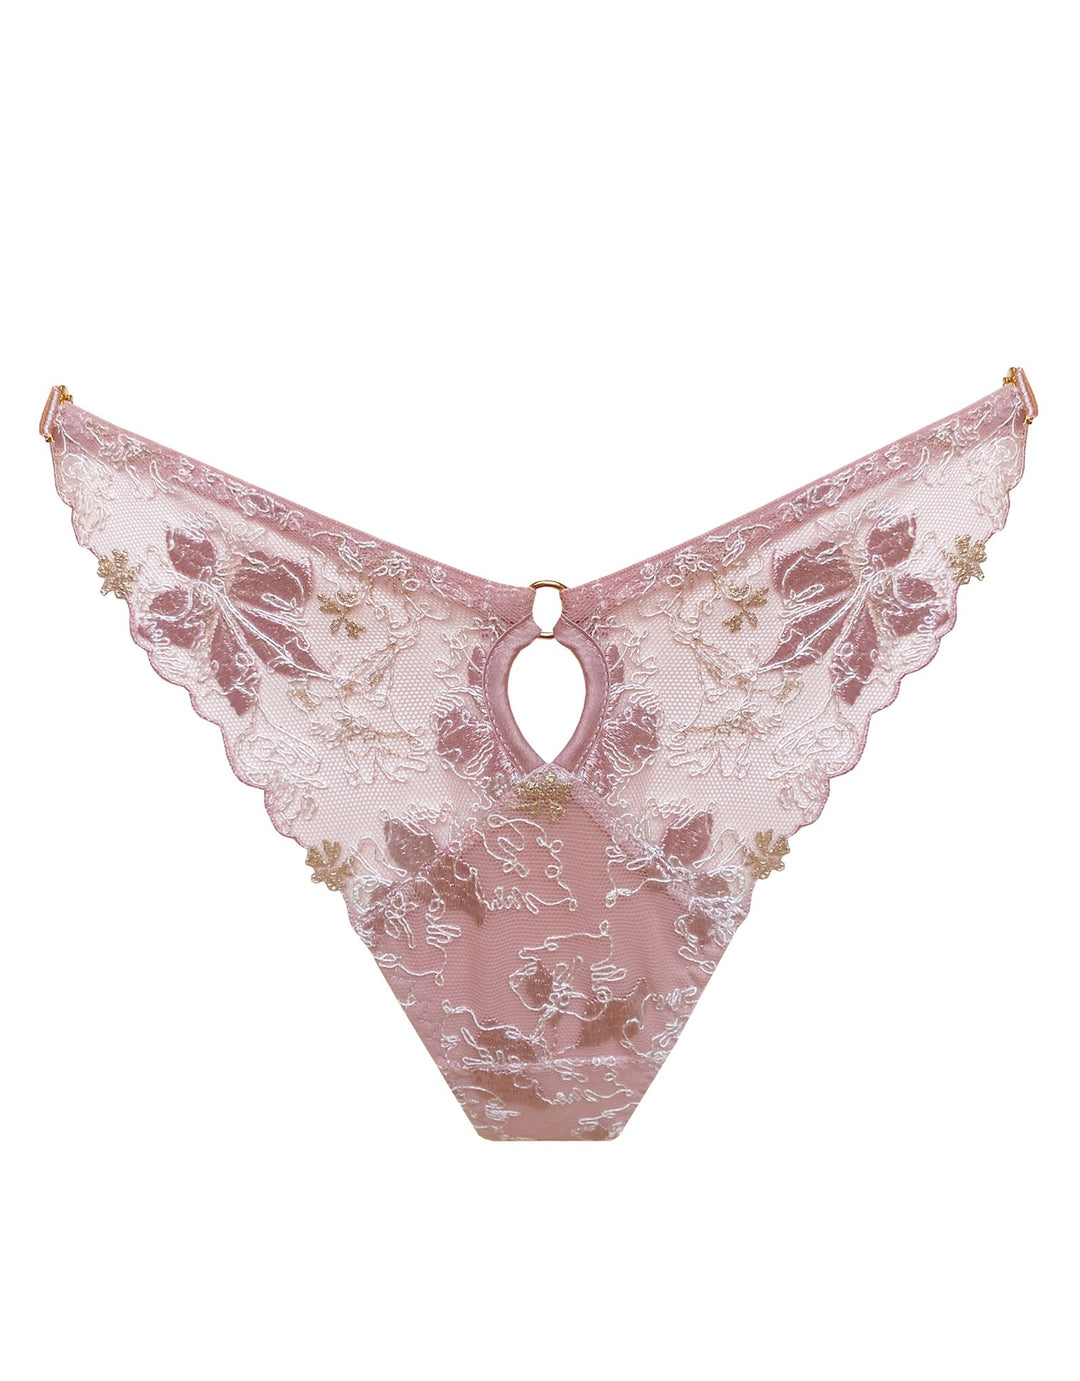 Pink tulle panties - eco-responsible lingerie made in Paris